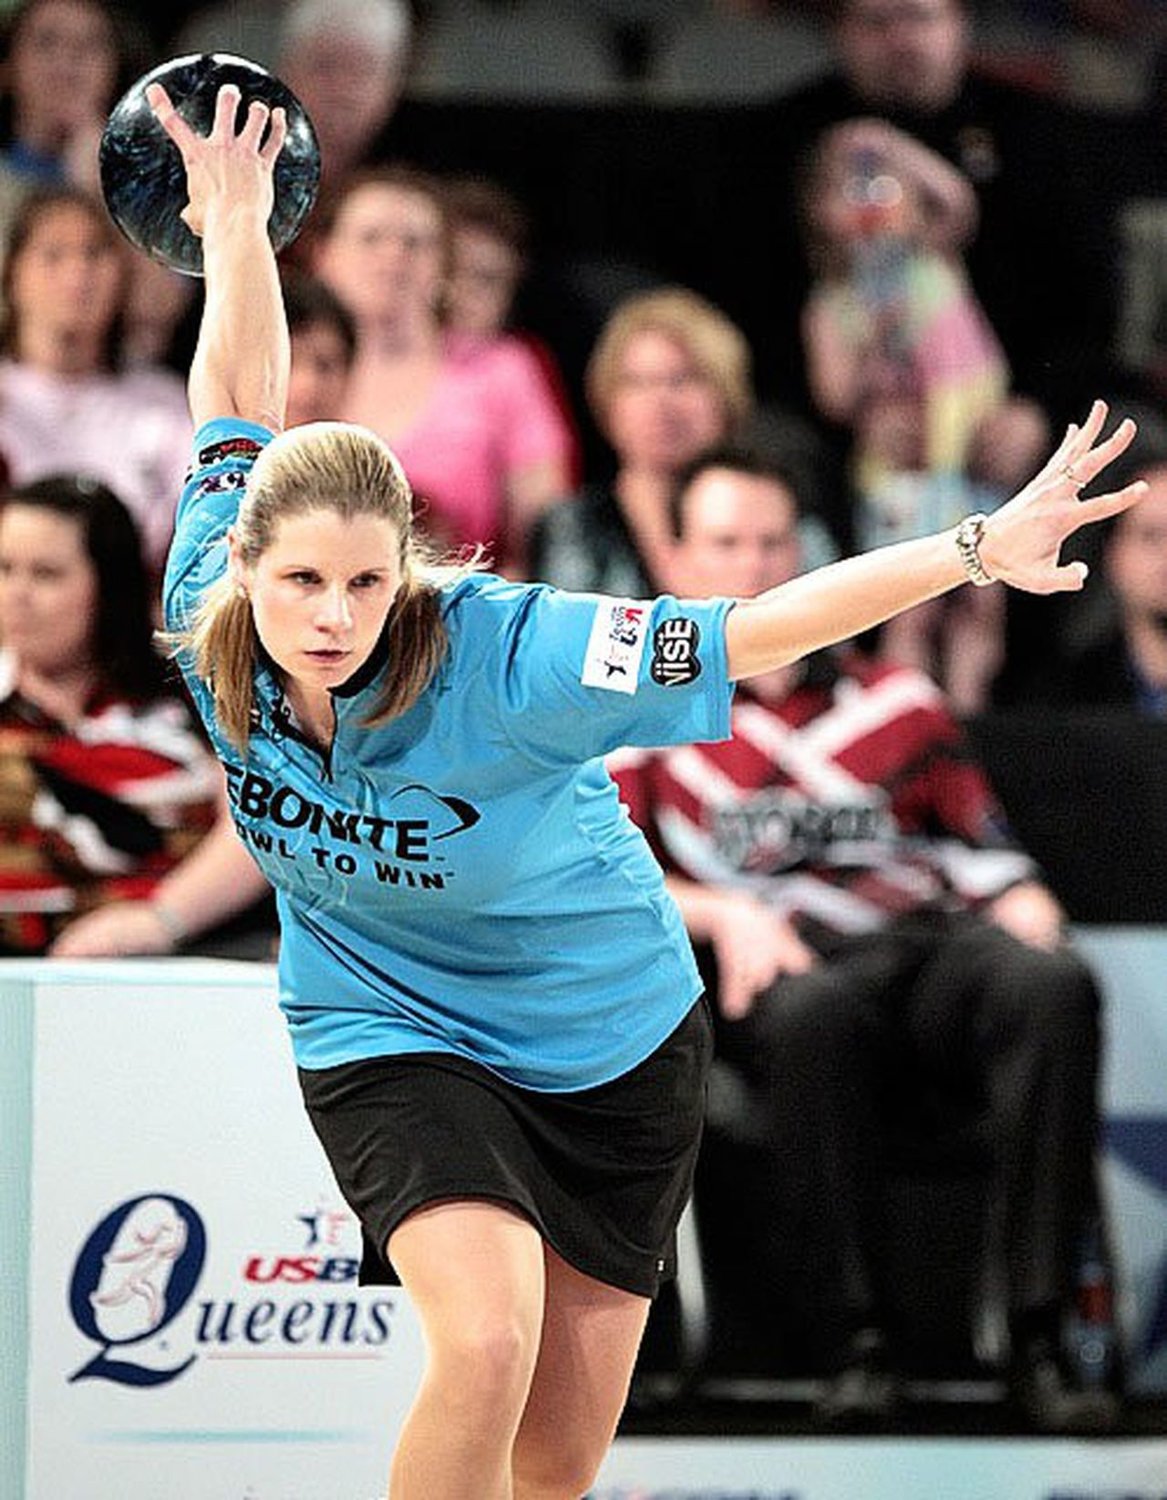 Kelly Kulick is the new head coach of the USA Junior Team bowling program.